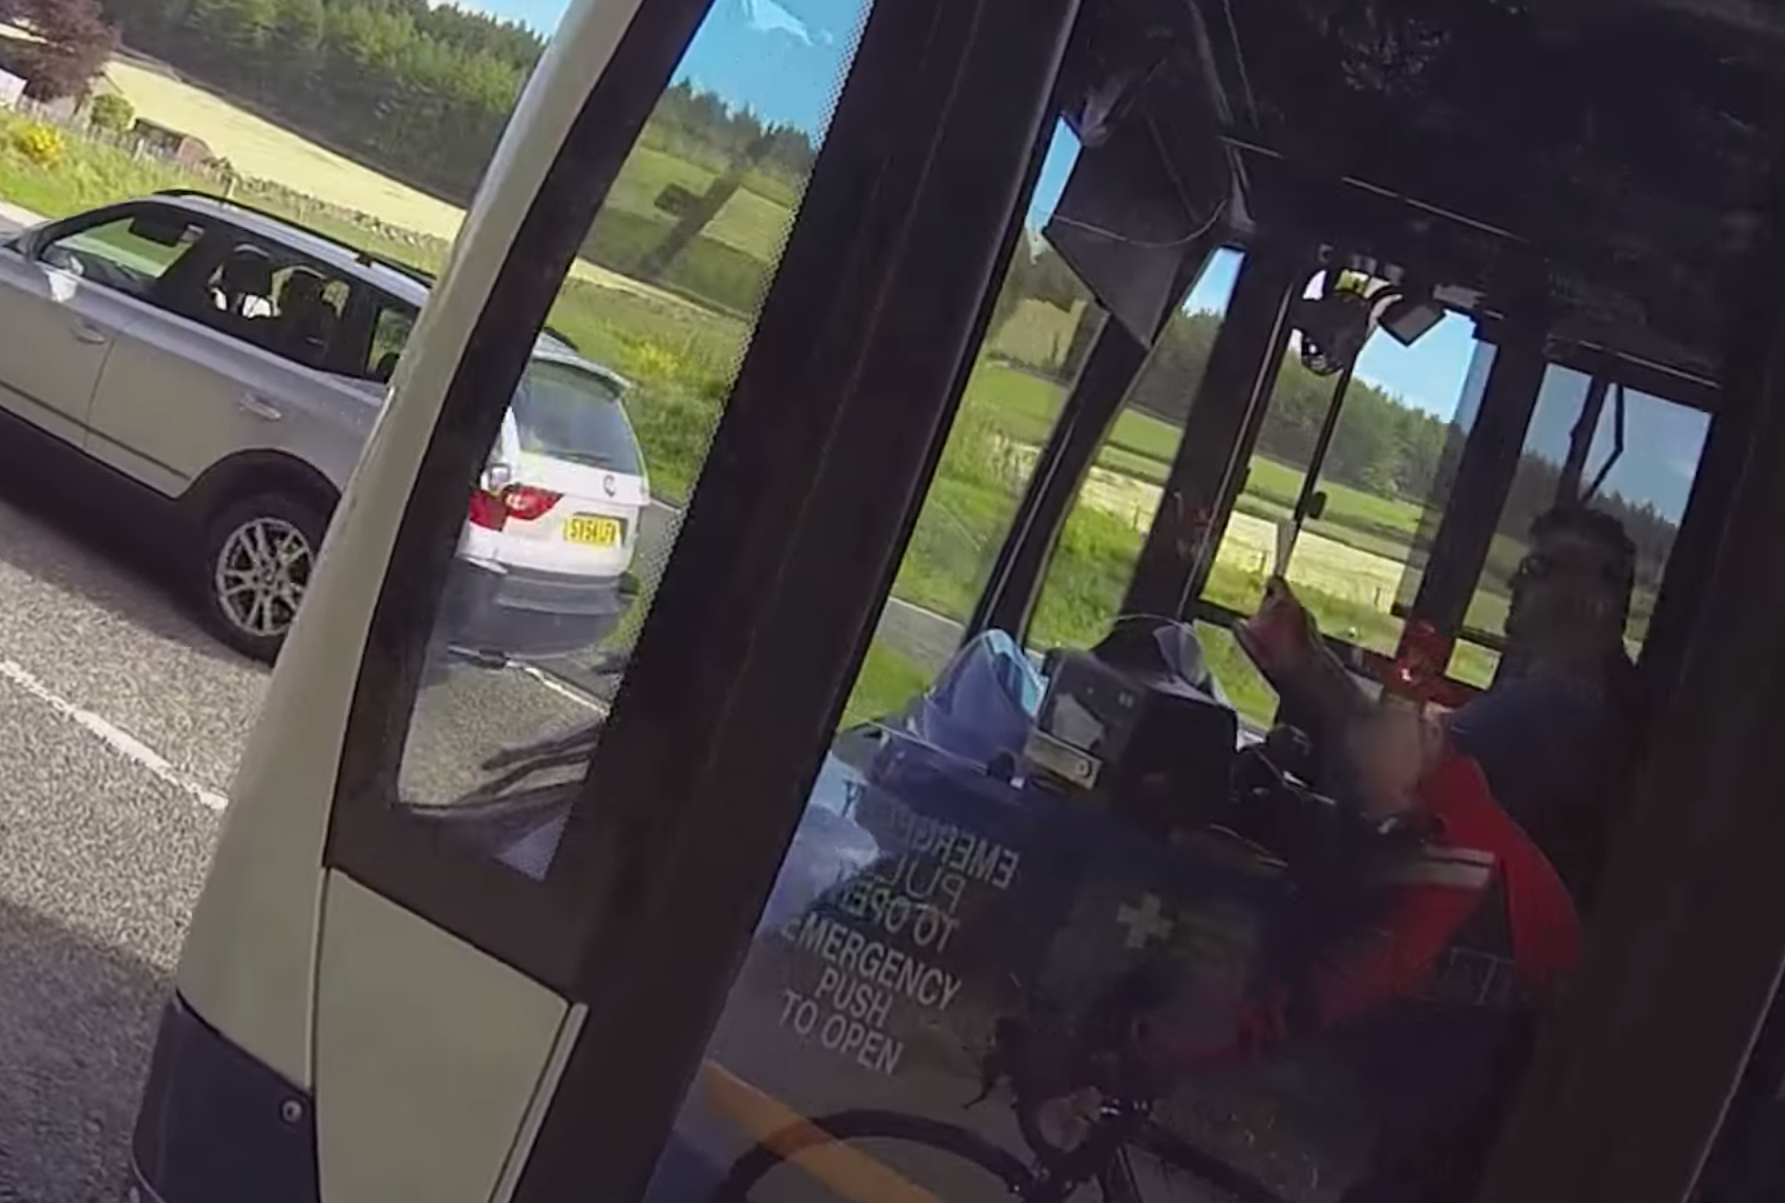 The Aberdeen bus driver is caught on camera